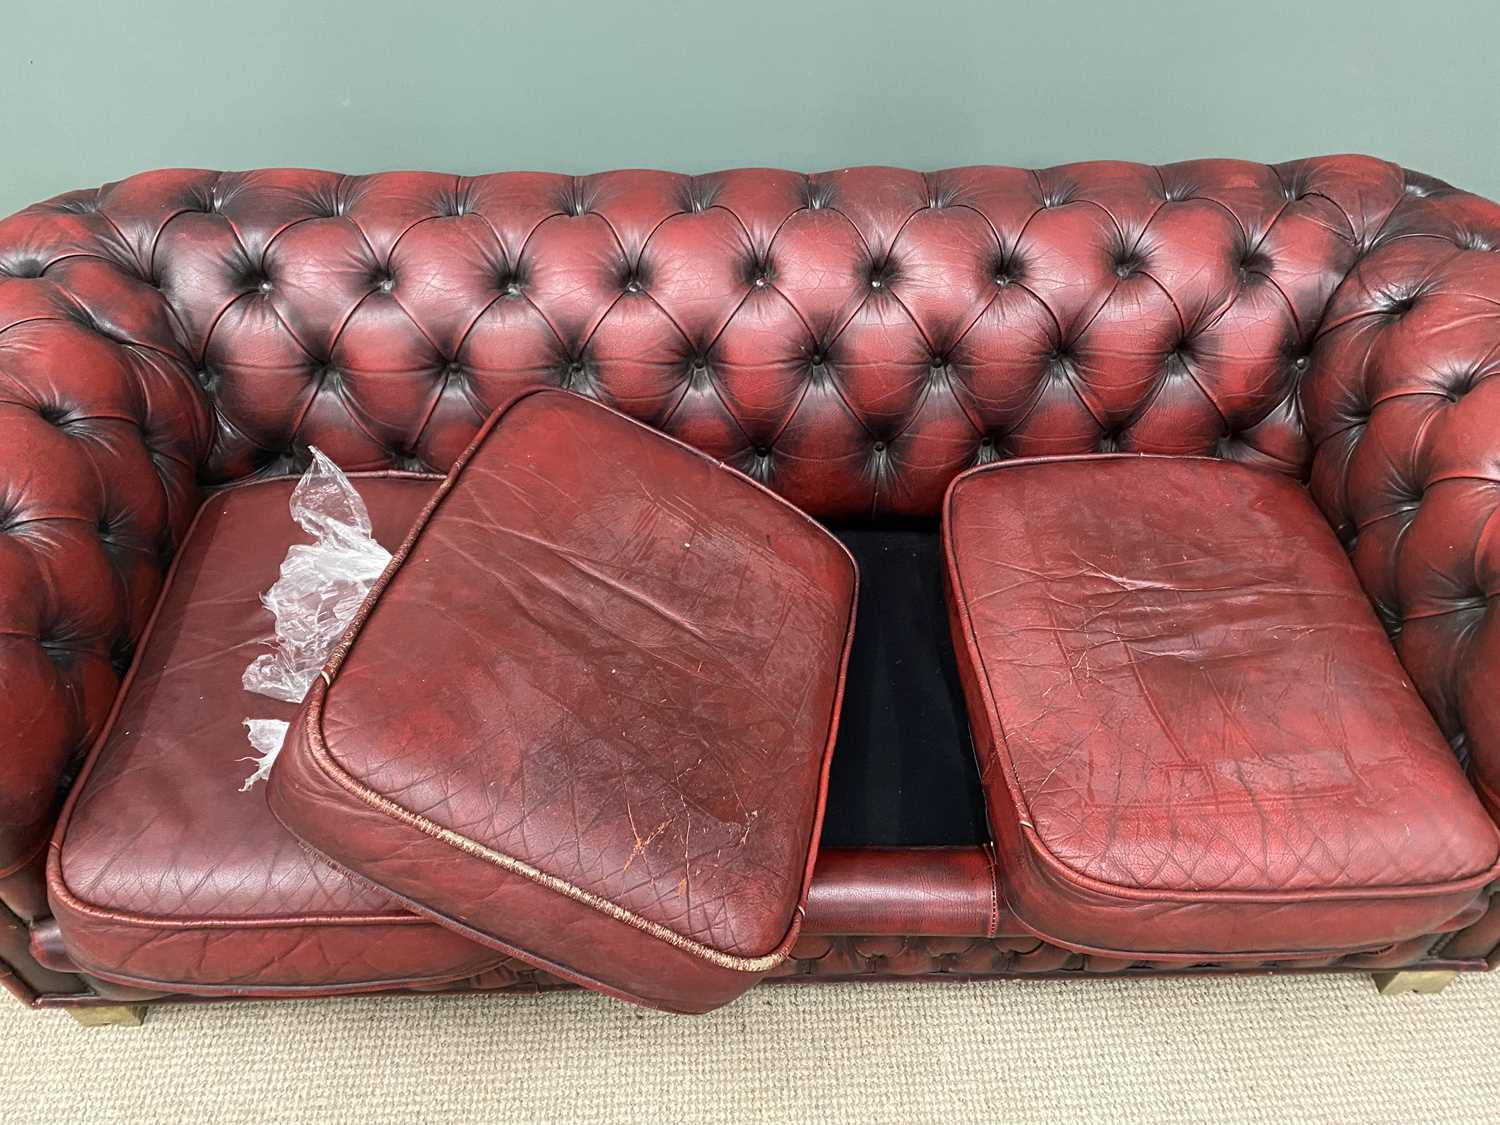 RED LEATHER THREE SEATER CHESTERFIELD TYPE SOFA 68 (h) x 188 (w) x 58cms (d) Provenance: private - Image 2 of 6